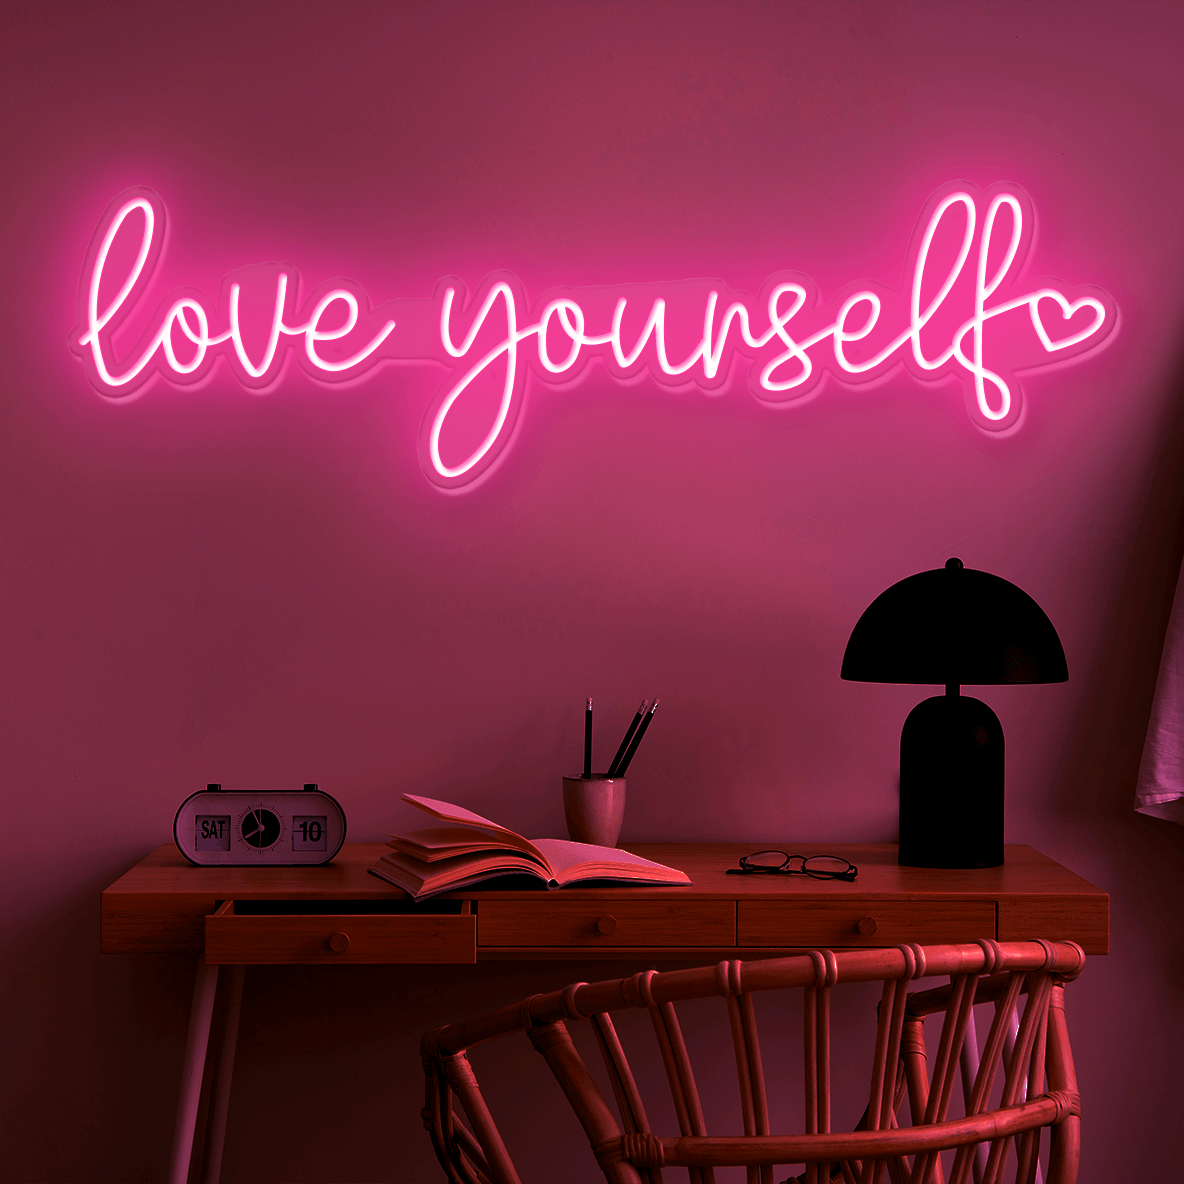 Love Yourself Neon Sign Army KPop Led Light